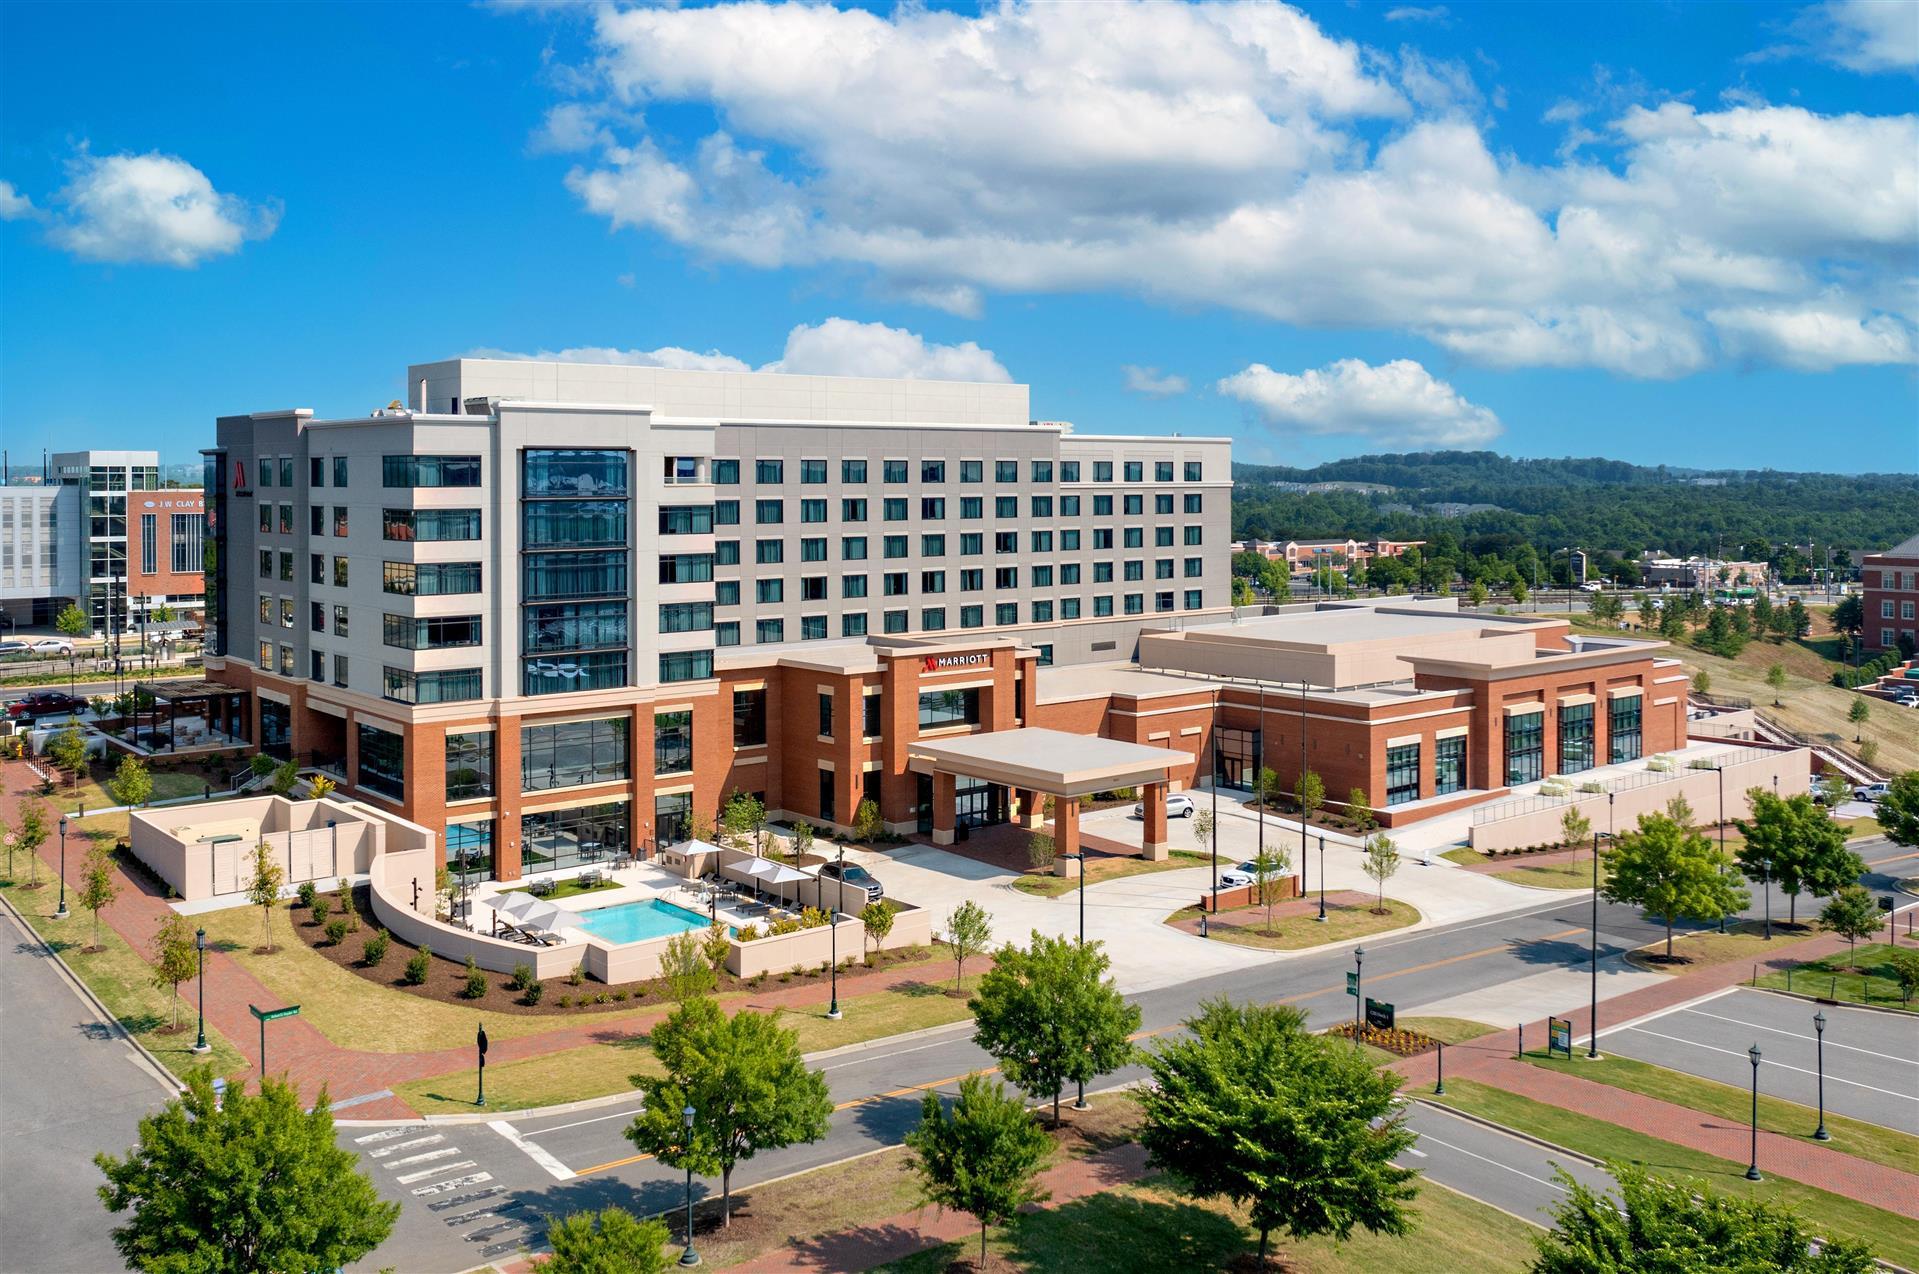 UNC Charlotte Marriott Hotel & Conference Center in Charlotte, NC